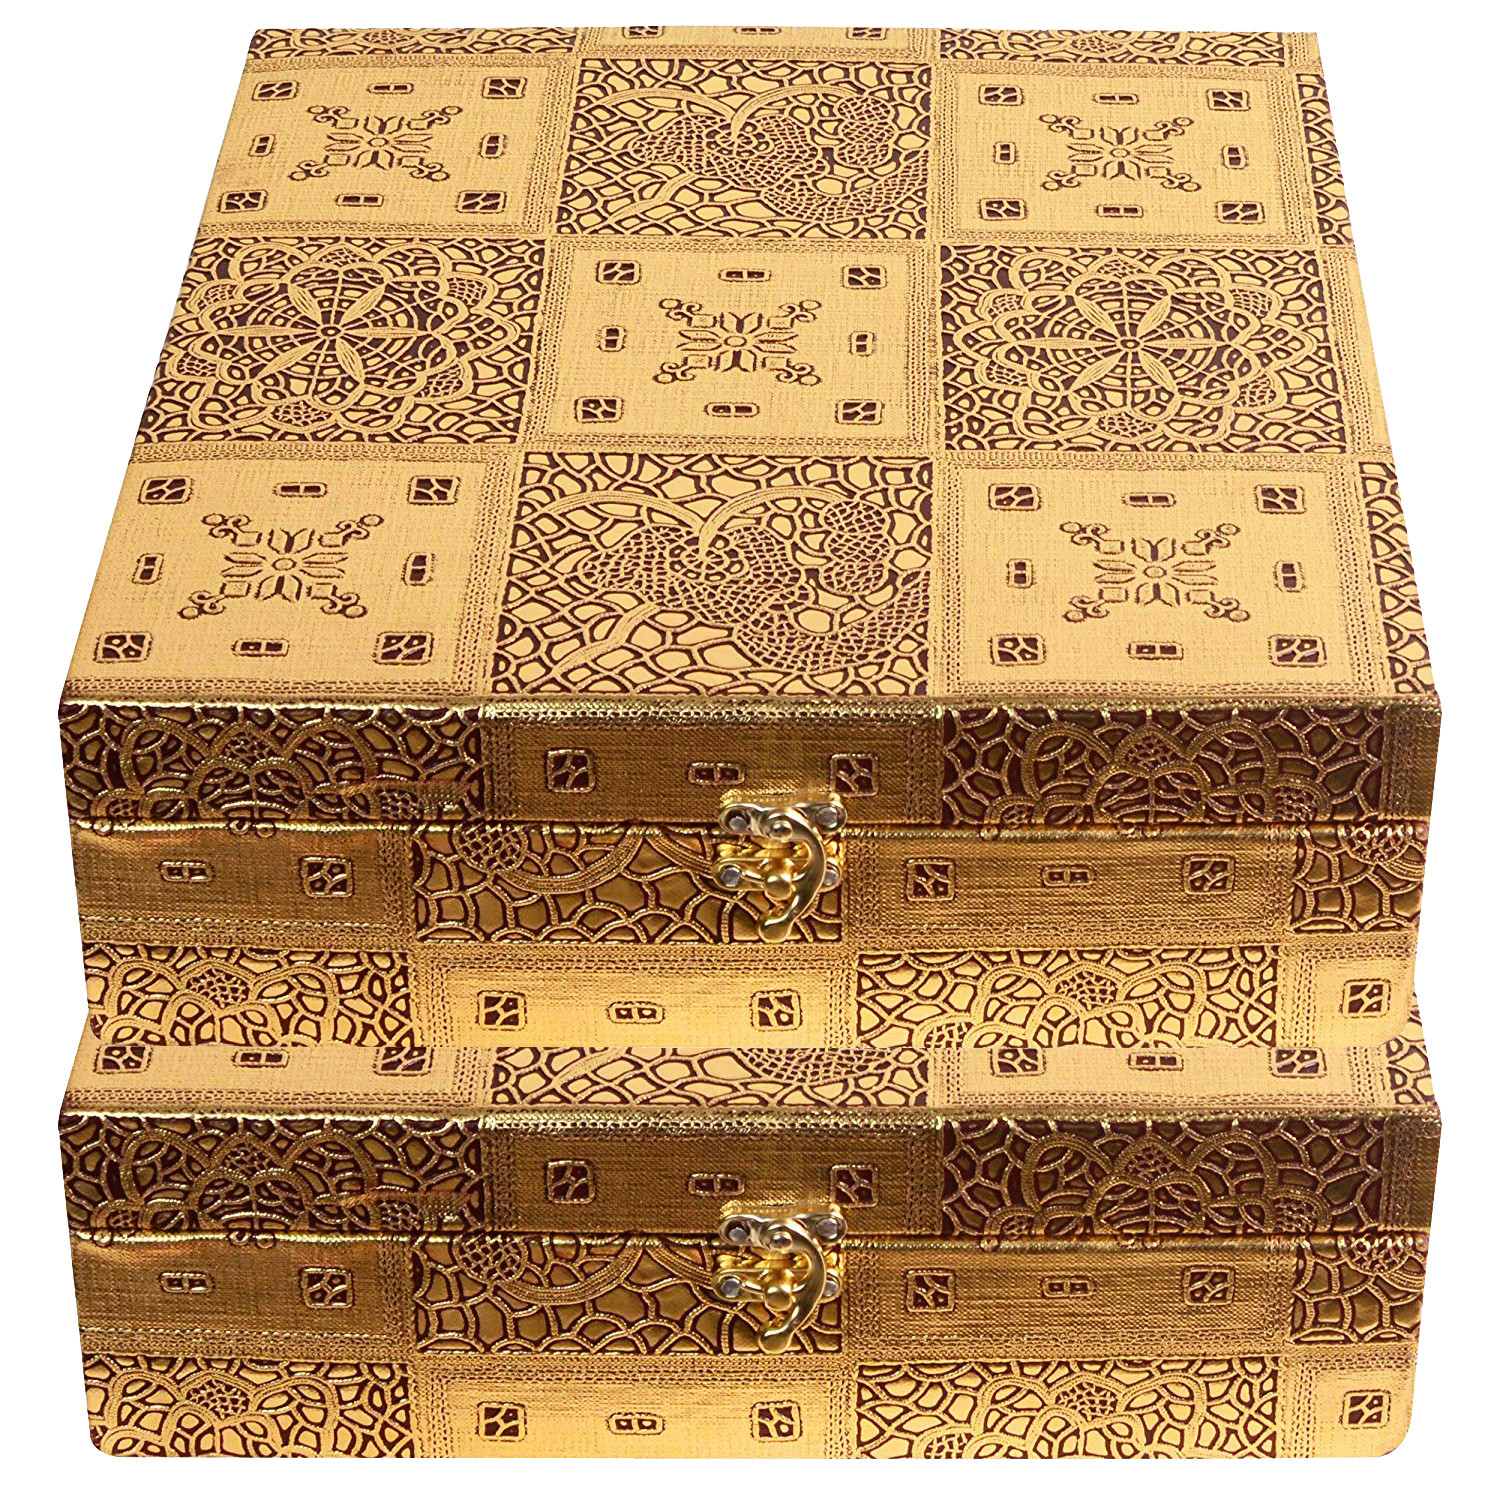 Kuber Industries Wooden Four Rod Bangle Storage Box with Lock System (Gold) -CTKTC39406